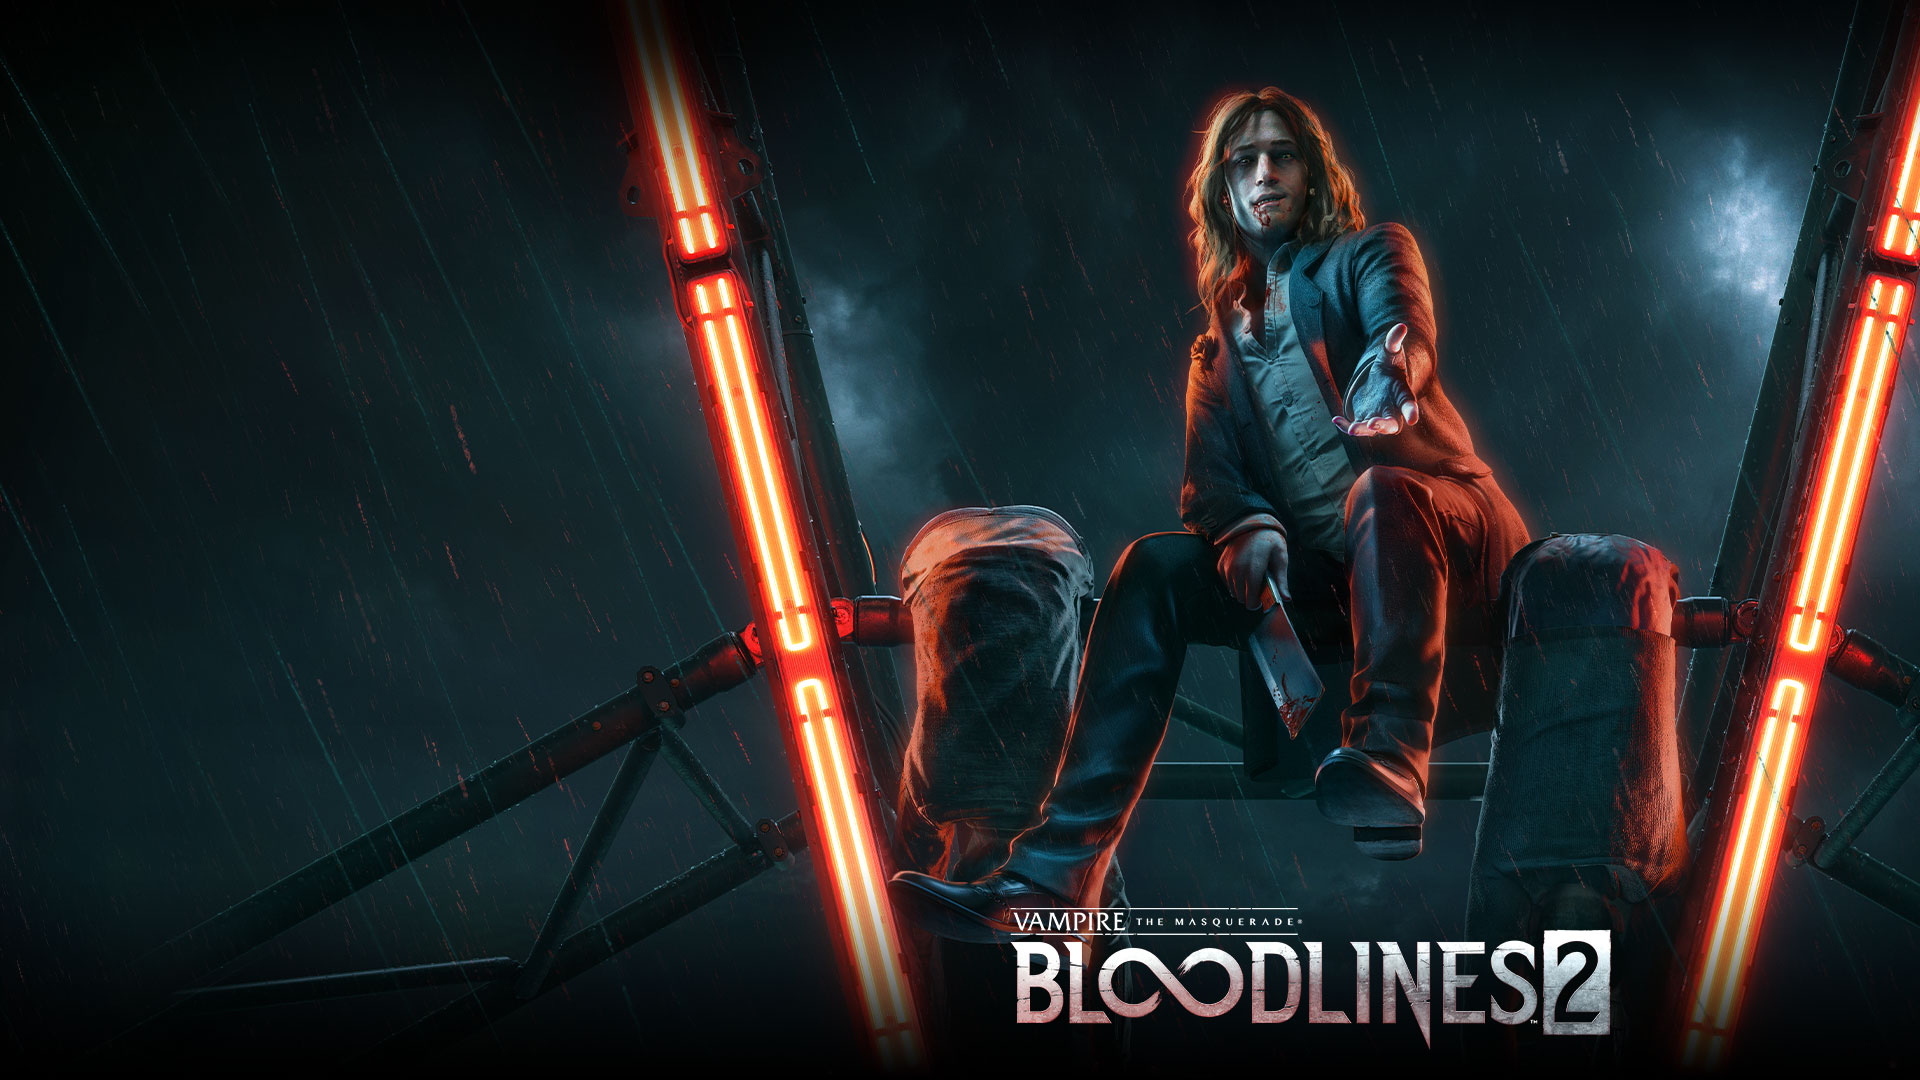 PS4 - Vampire The Masquerade: Bloodlines 2 Gameplay Trailer (E3 2019) 